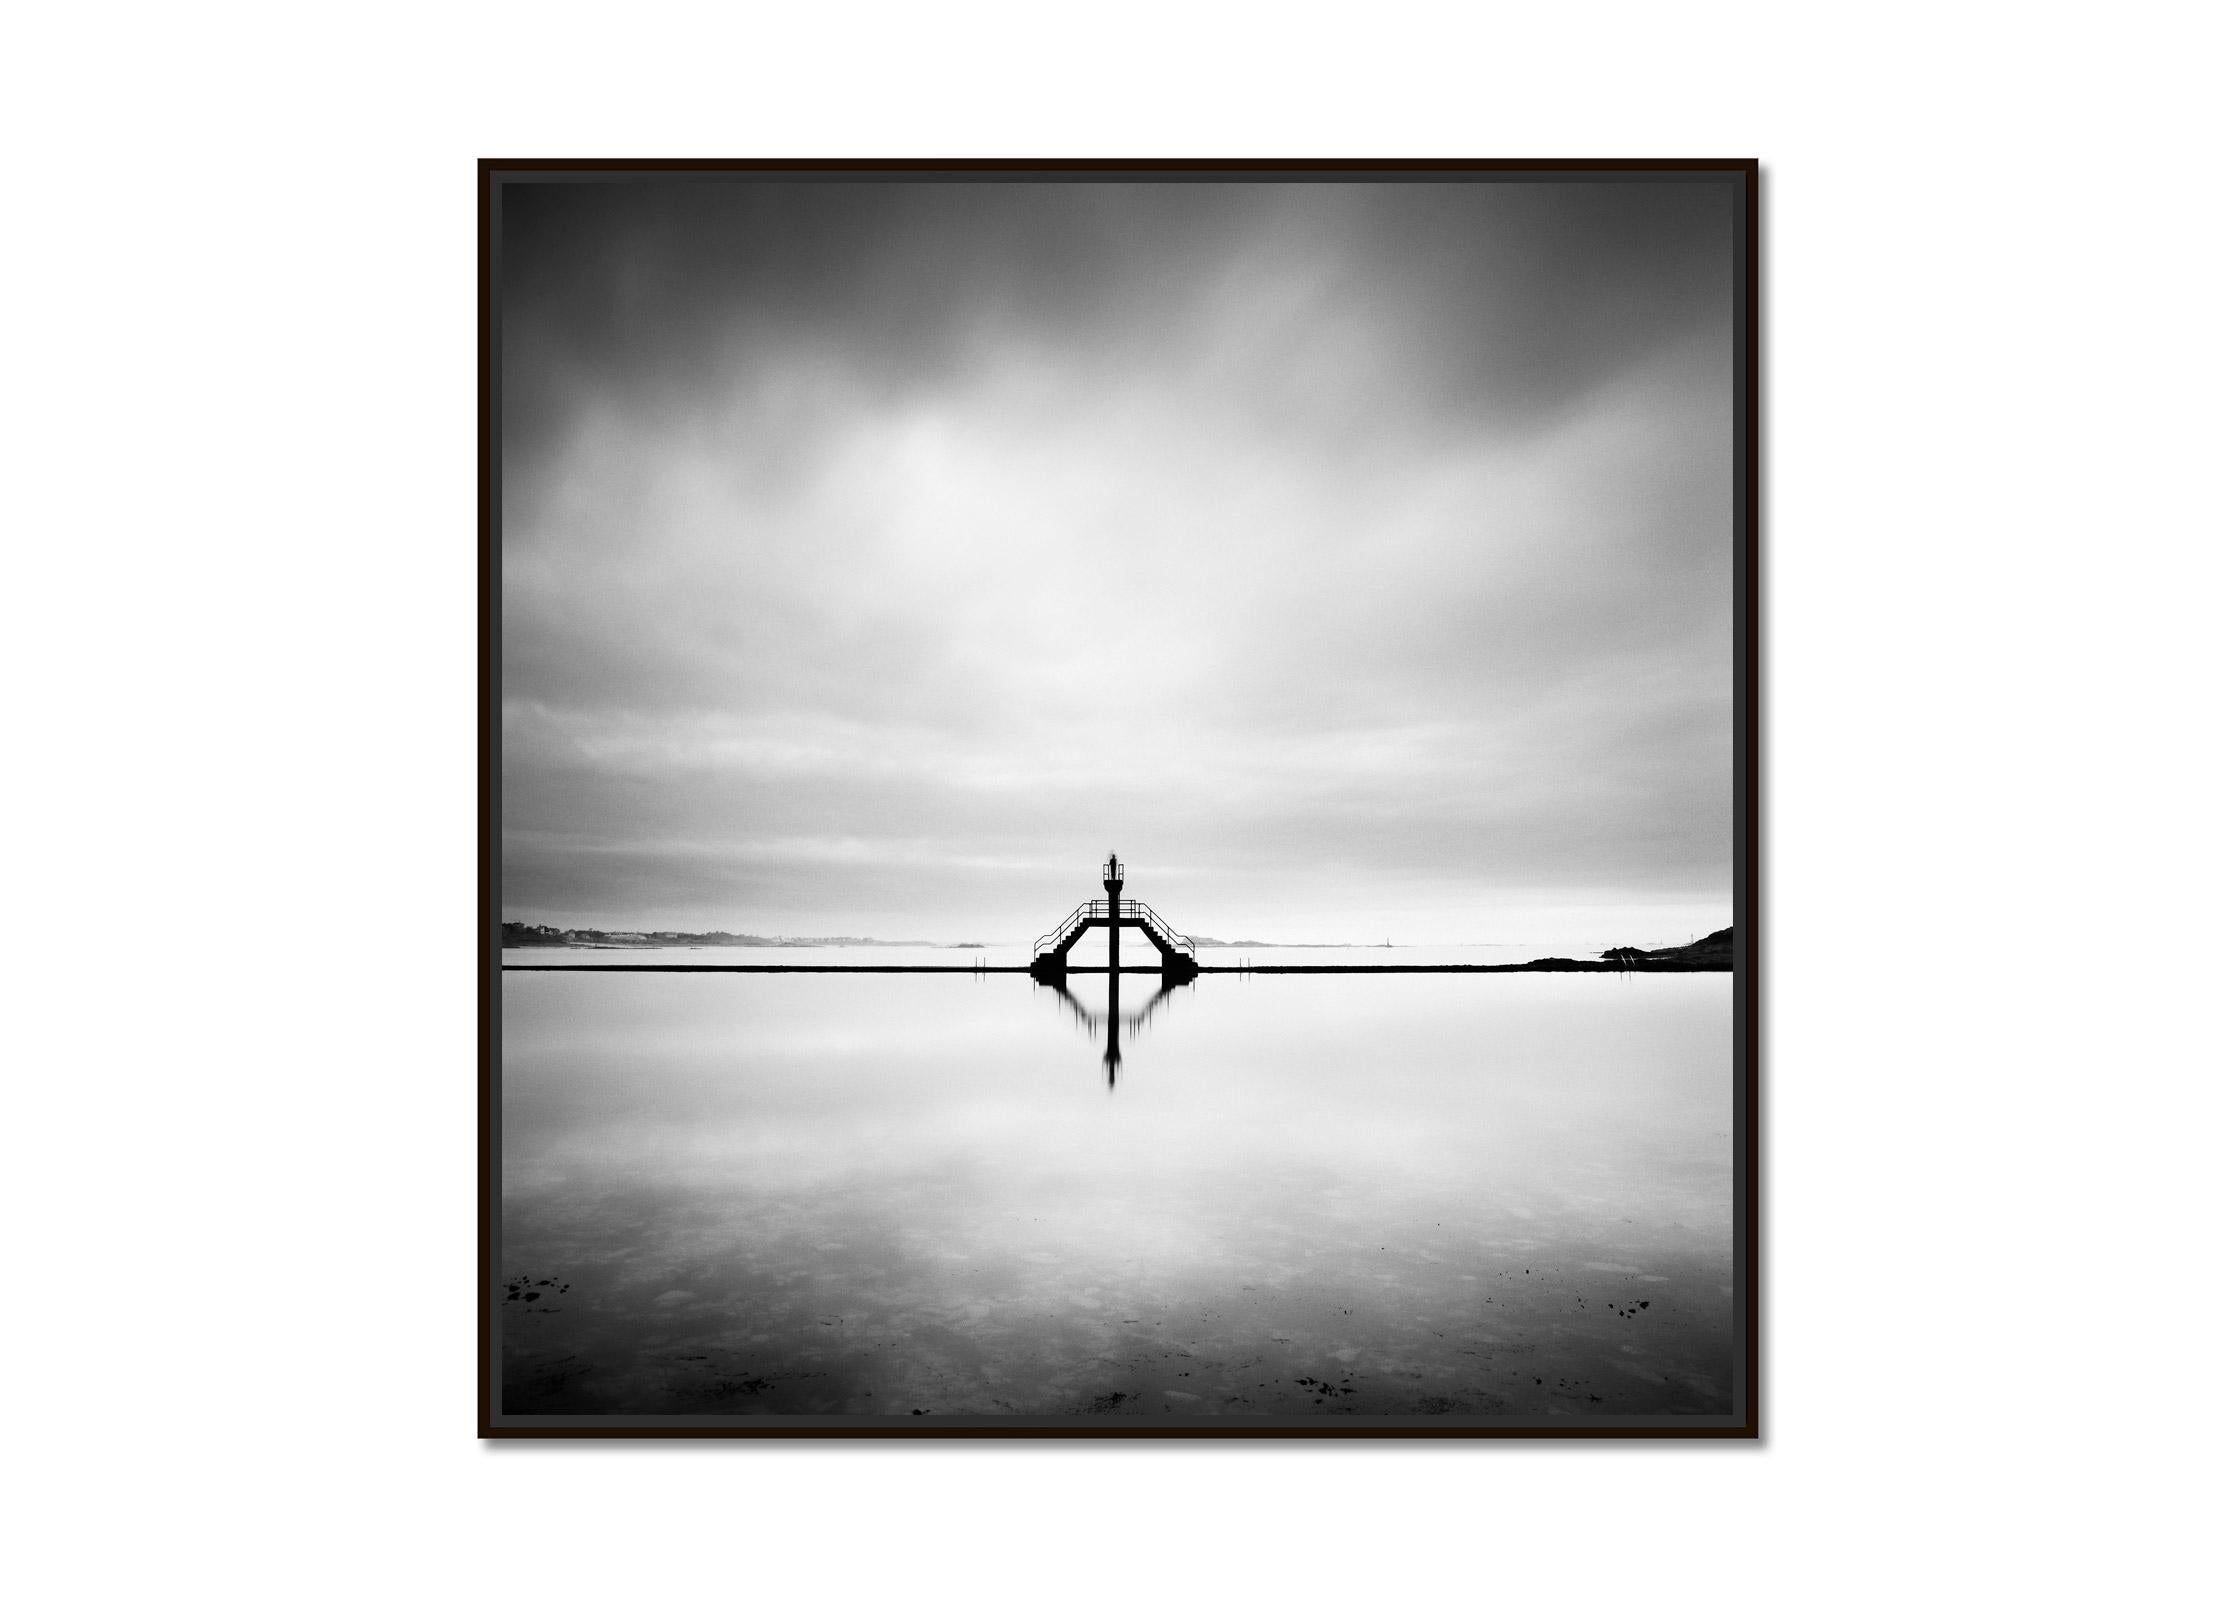 Diving Platform, Swimming Pool, black and white fine art photography, landscape - Photograph by Gerald Berghammer